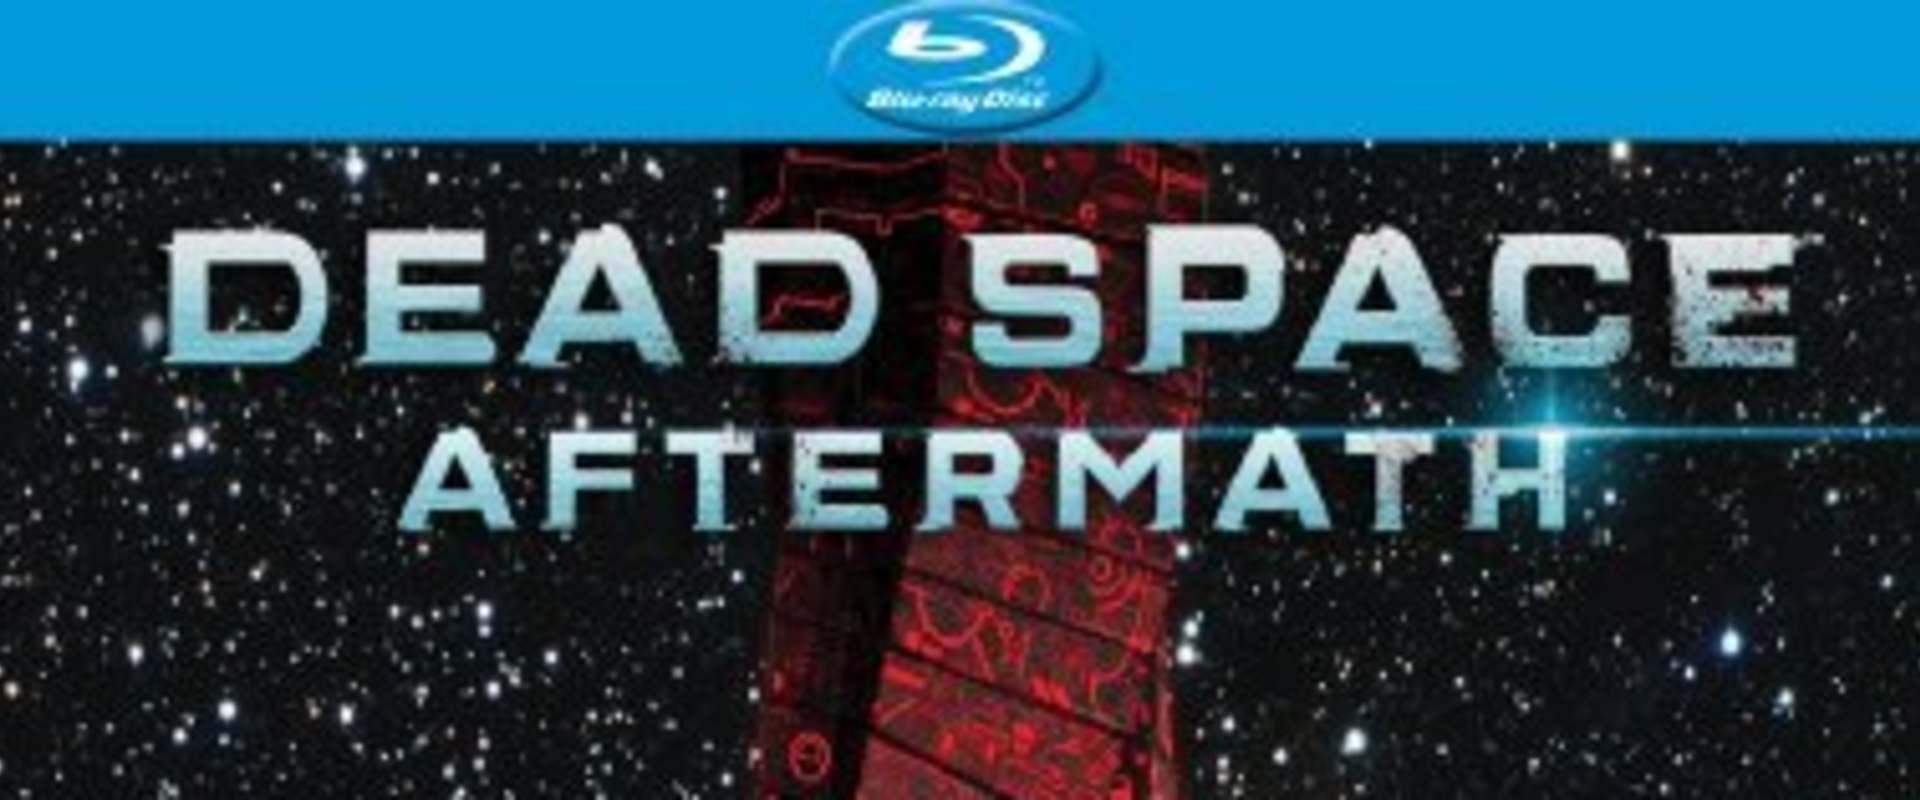 dead space aftermath full movie